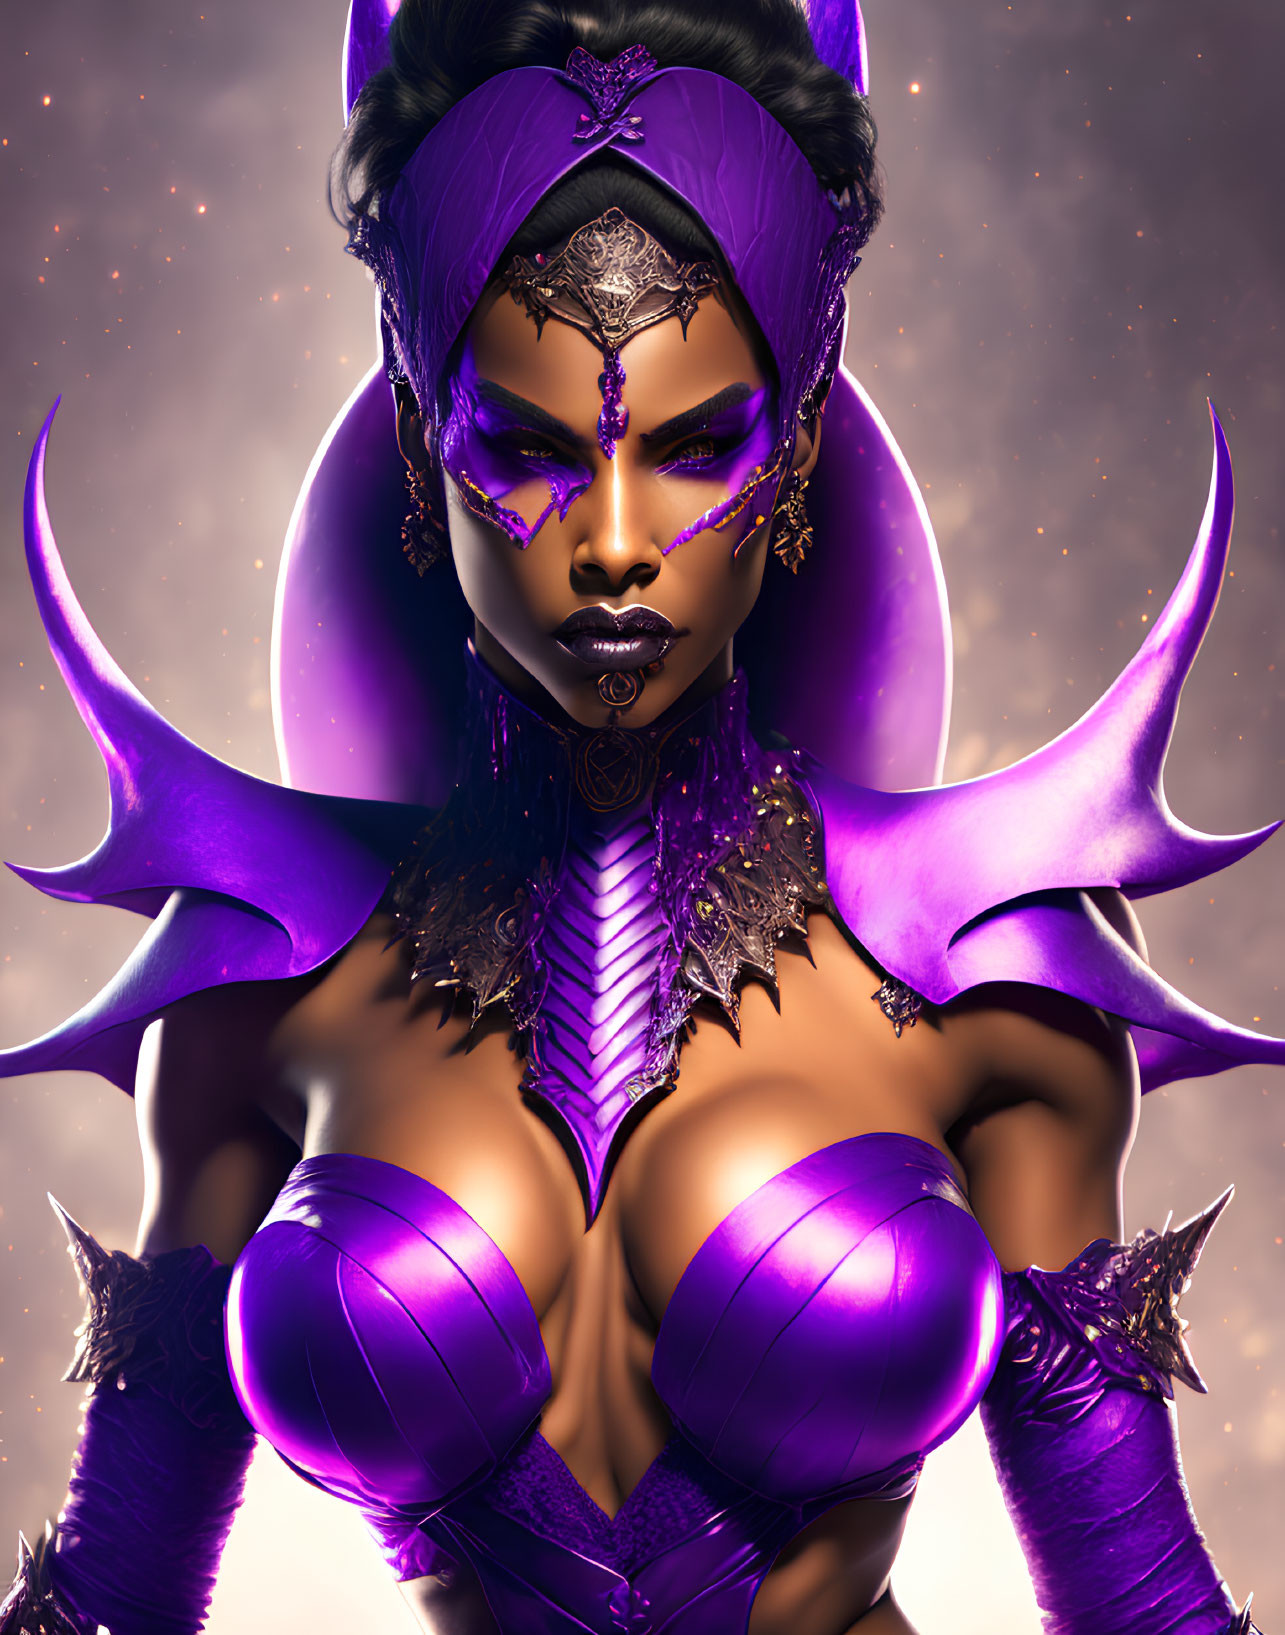 Female character in purple fantasy armor on starry backdrop